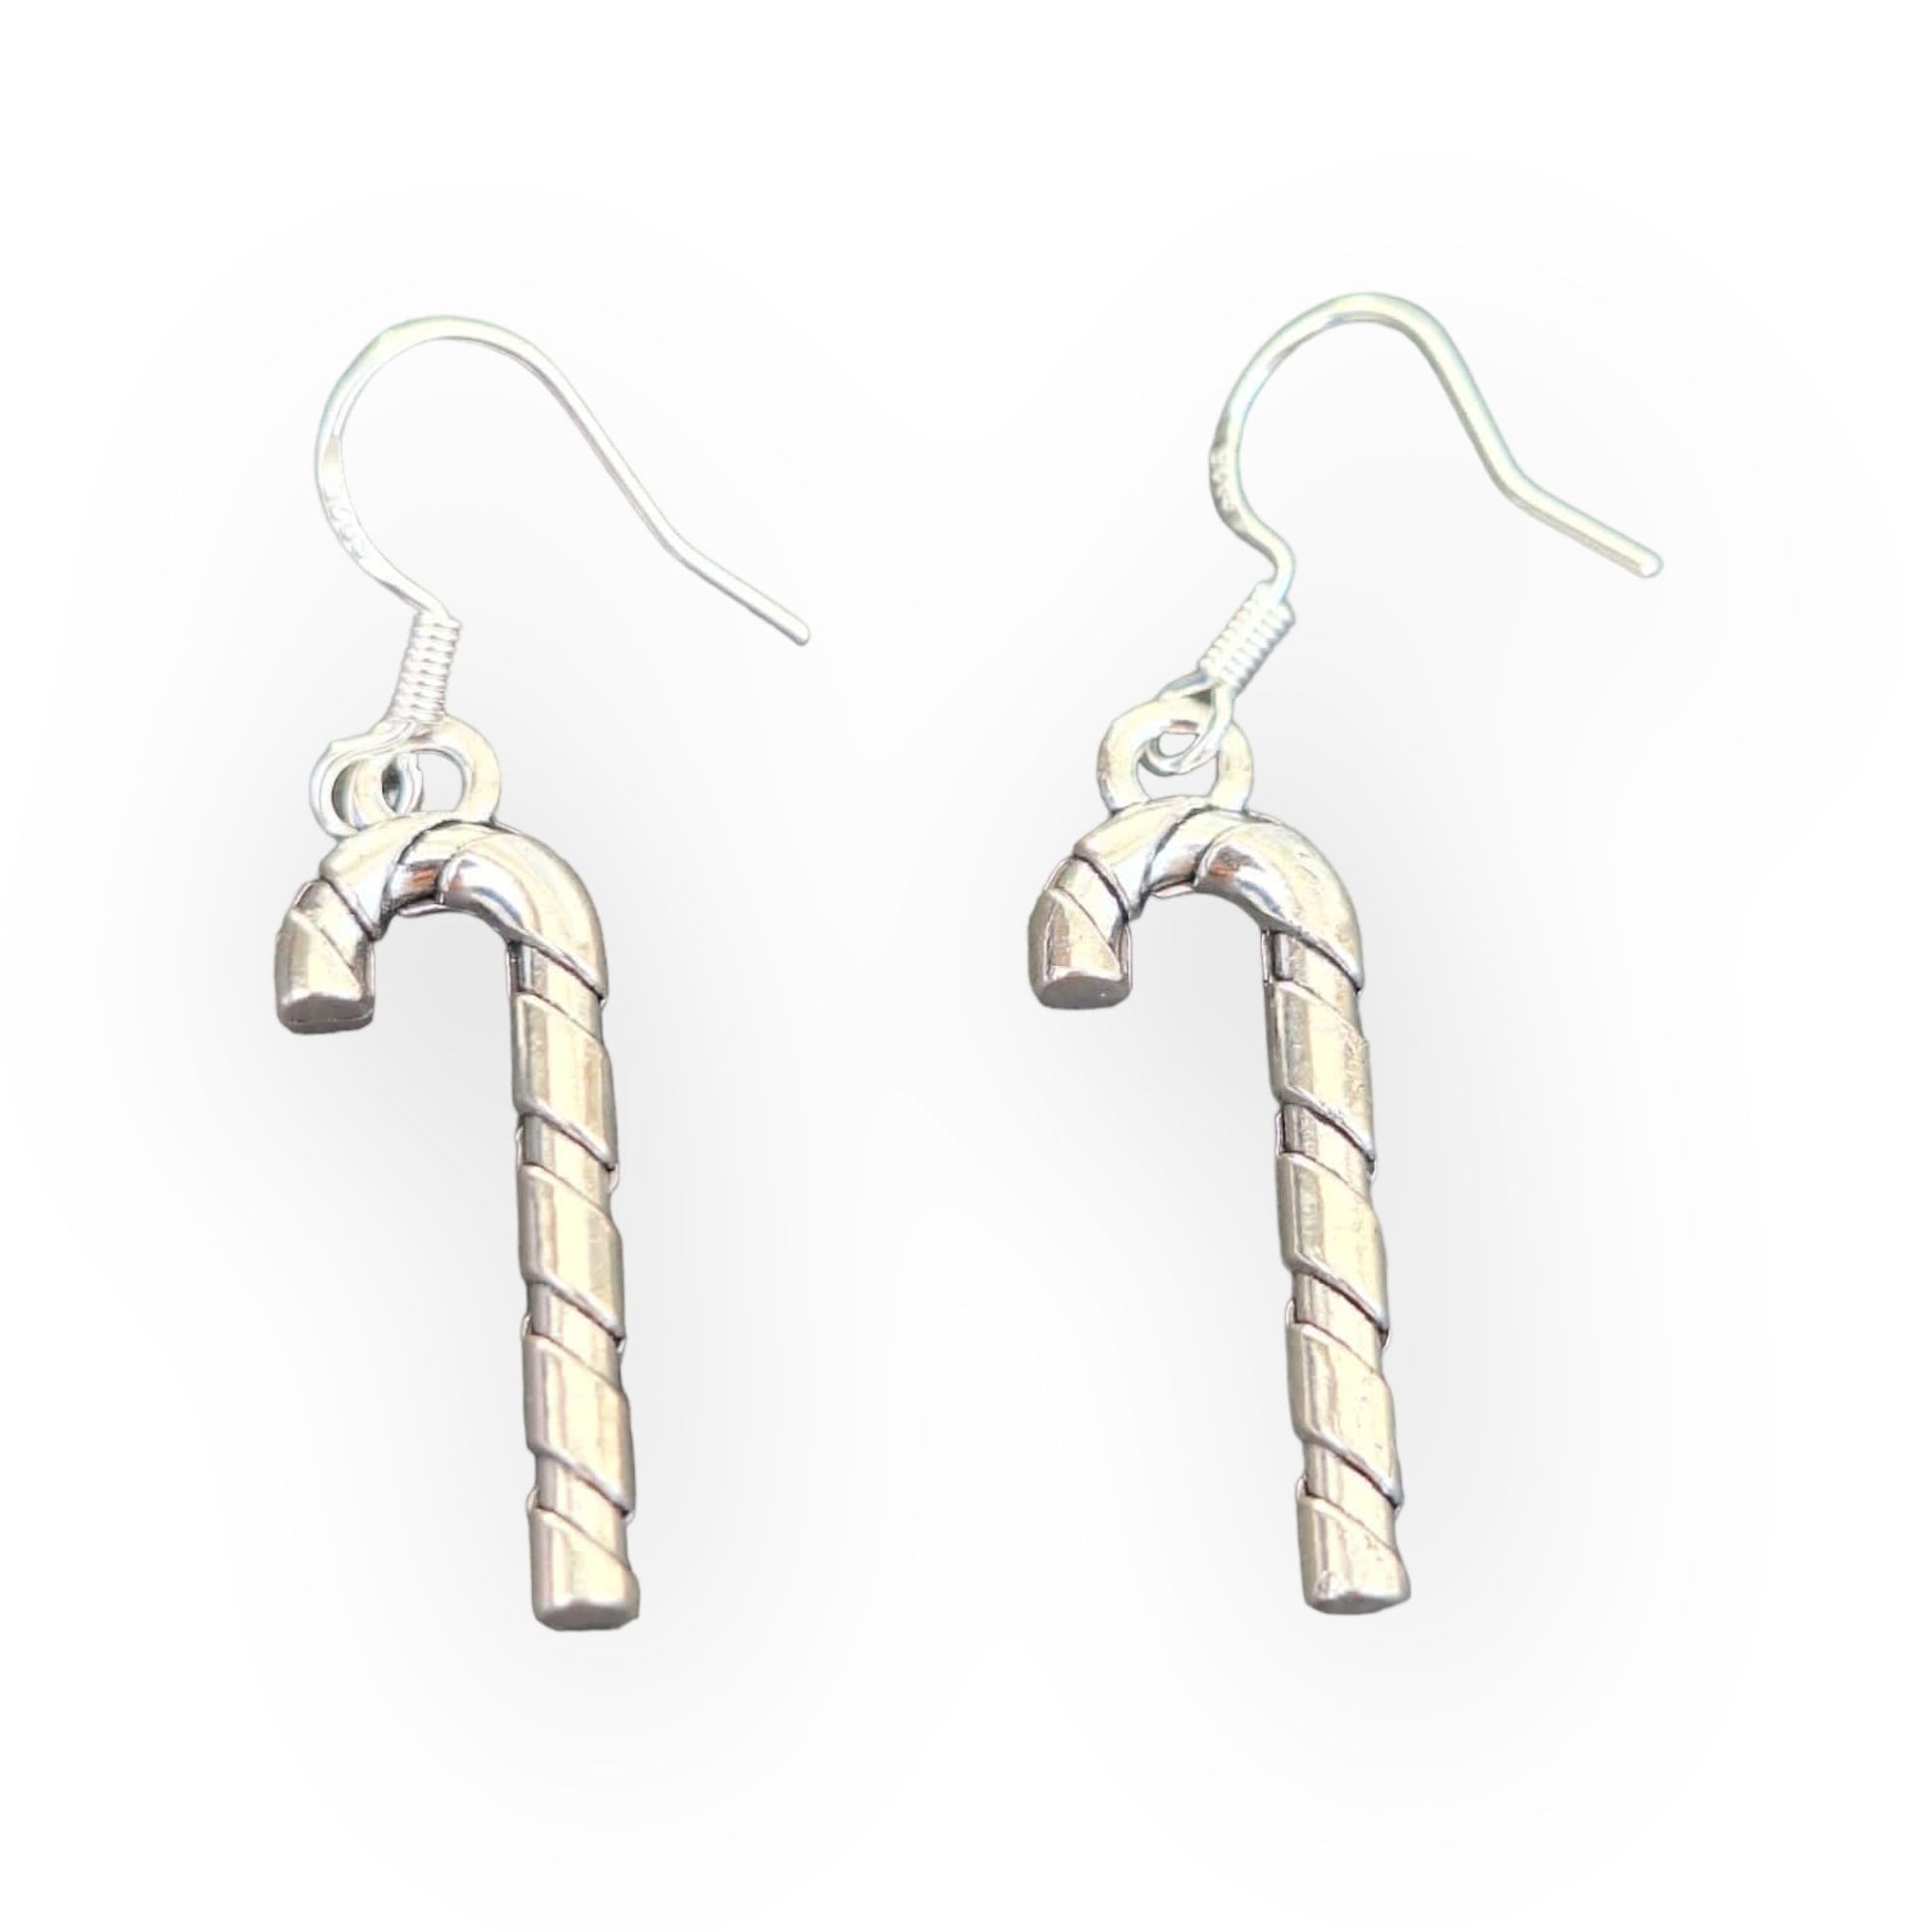 Handmade Antique Silver Candy Cane Dangly Charm Earrings In Gift Bag, Winter, Christmas, Gifts For Her - Premium  from Etsy - Just £4.99! Shop now at Uniquely Holt